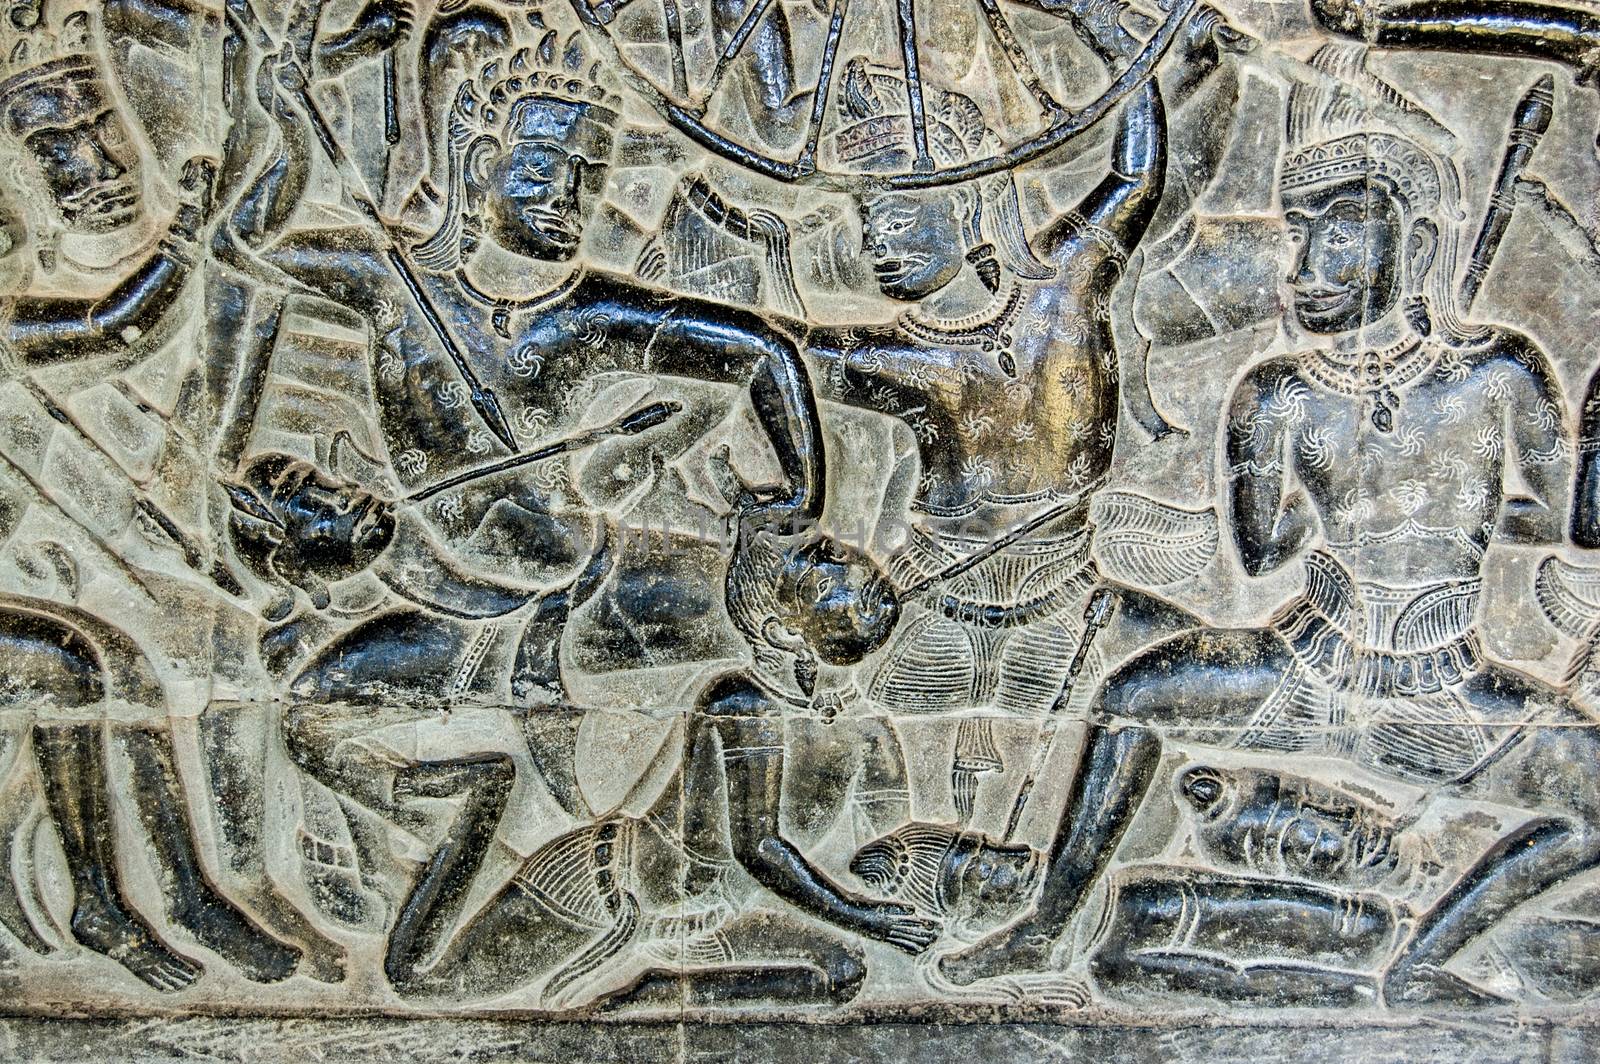 An ancient Khmer carving of the Battle of Kurukshetra showing a man being killed as described in the Mahabharata. Bas Relief, Angkor Wat Temple, Siem Reap, Cambodia.